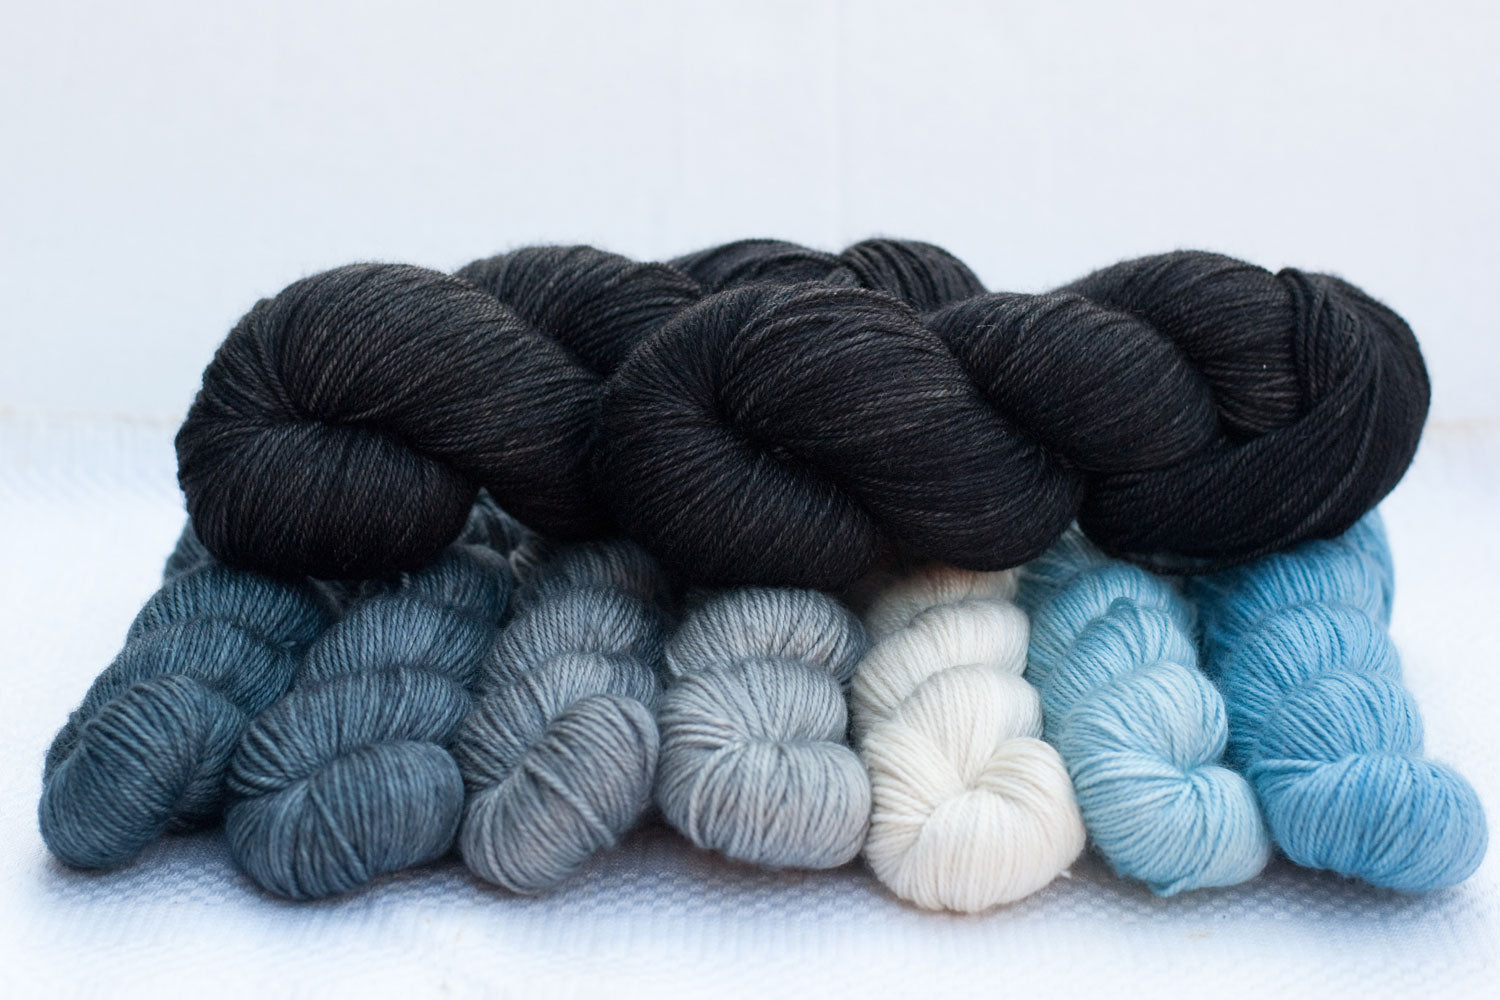 2 full skeins of black hand-dyed yarn arranged on top of grey, white and blue gradient set